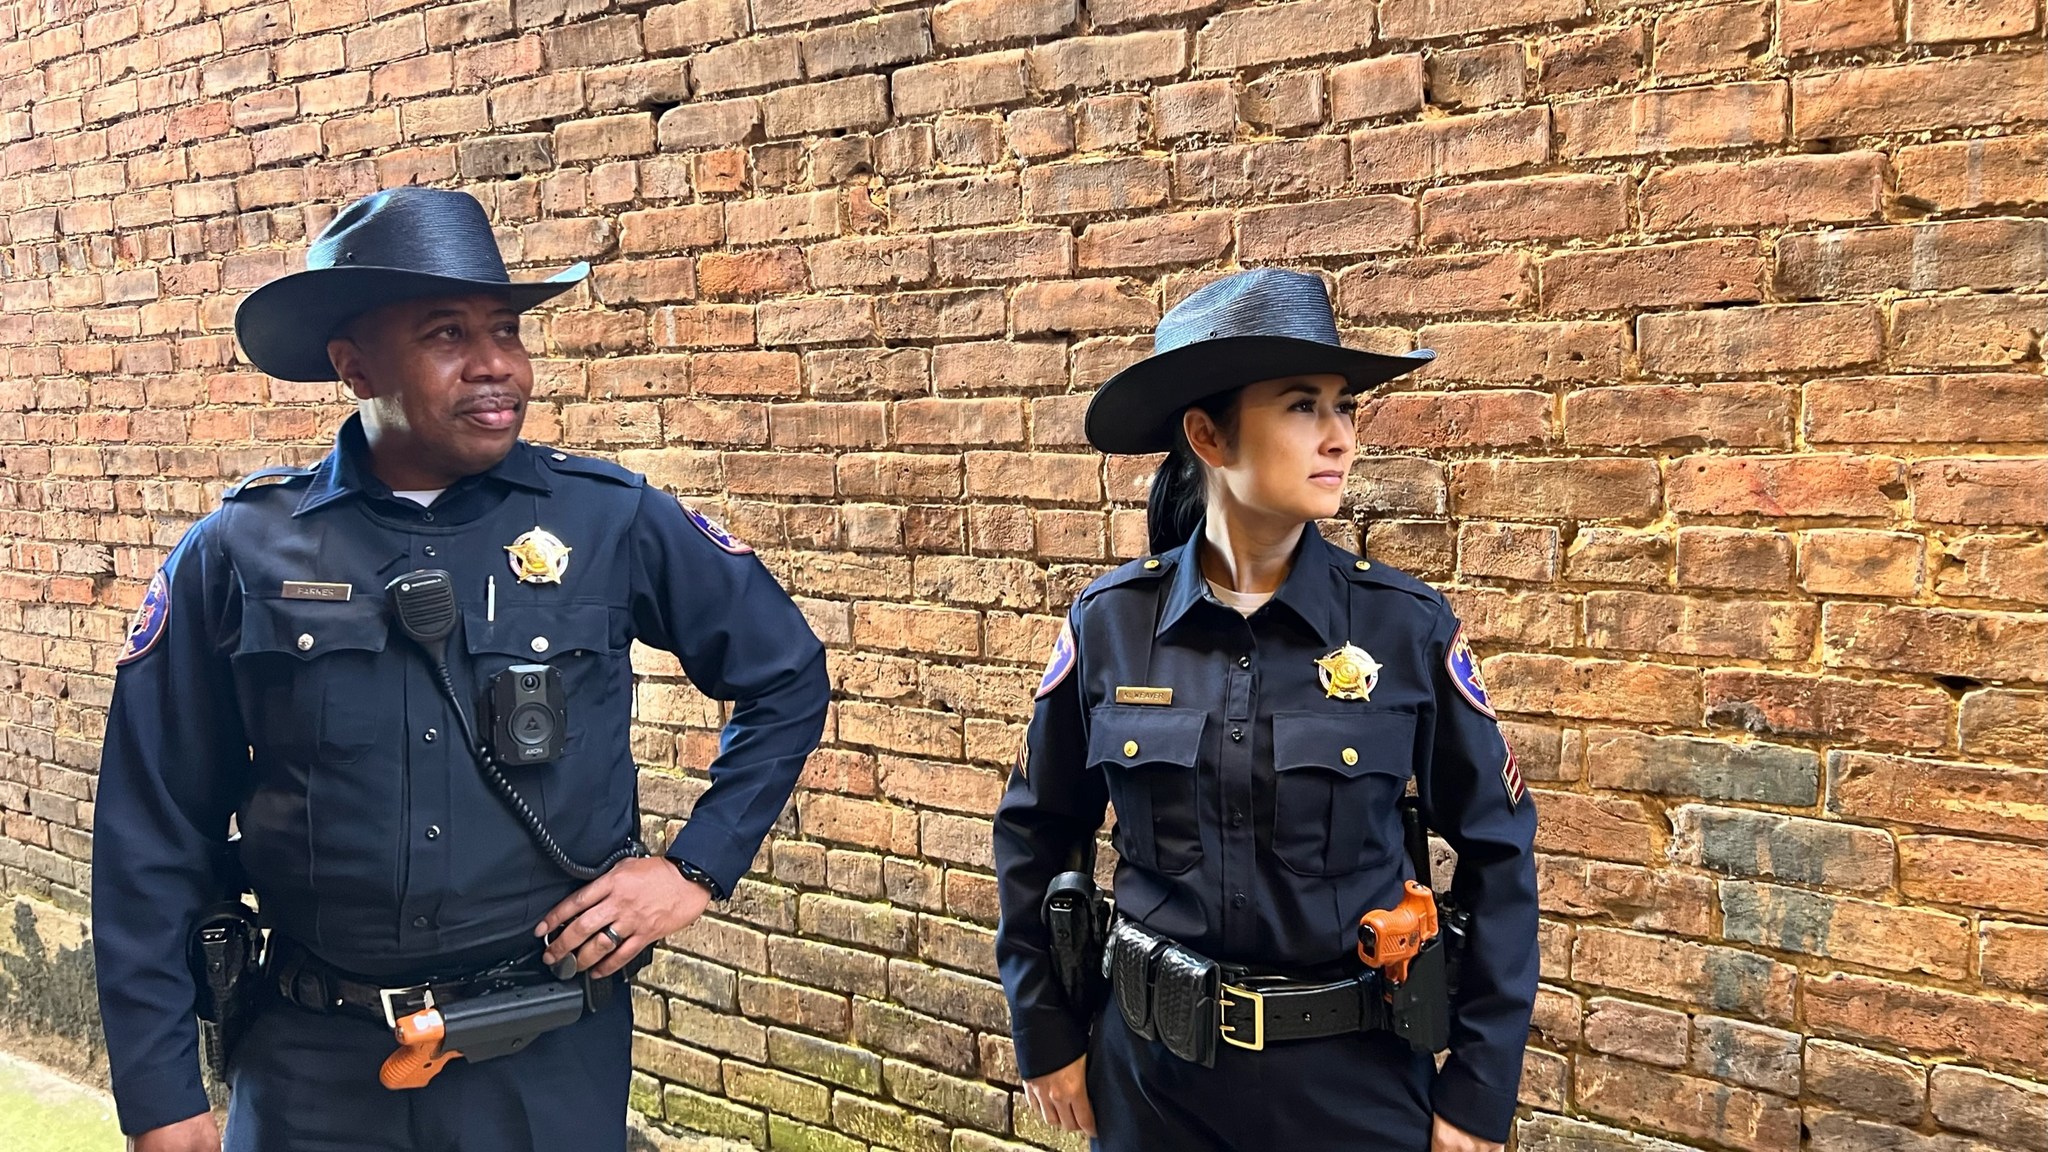 Texarkana Texas PD rolls out new look for uniforms